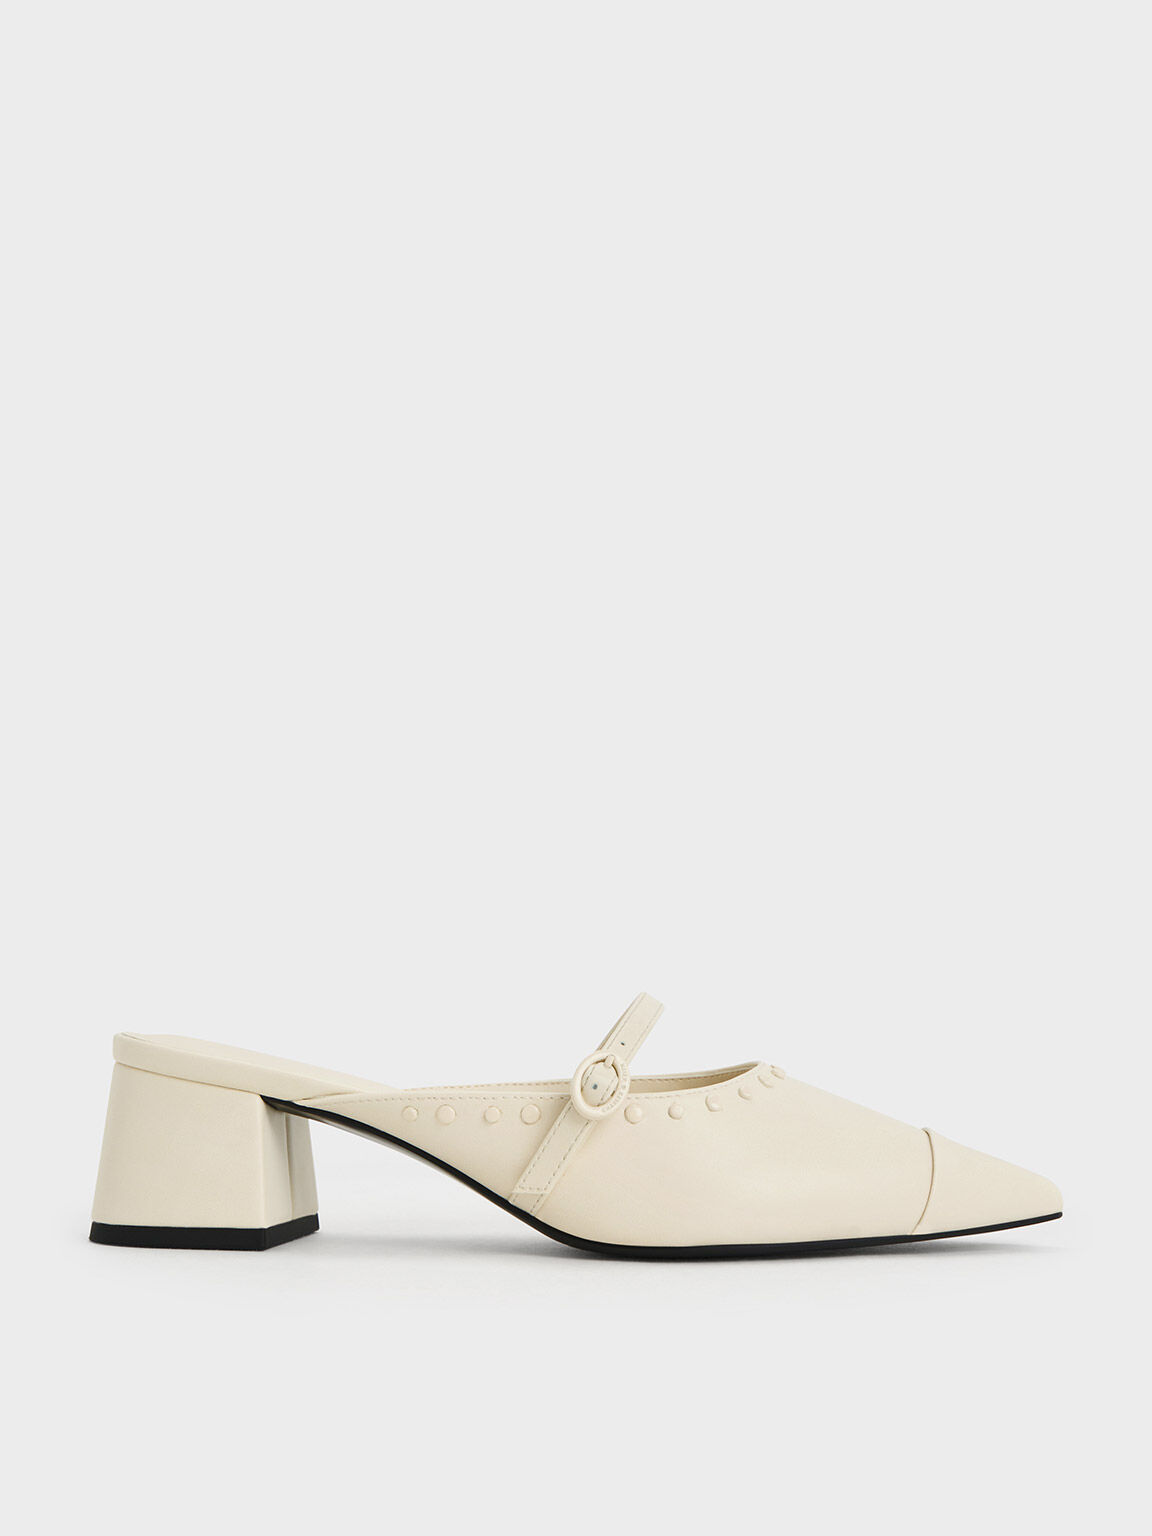 Women's Mules | Shop Exclusive Styles | CHARLES & KEITH TH